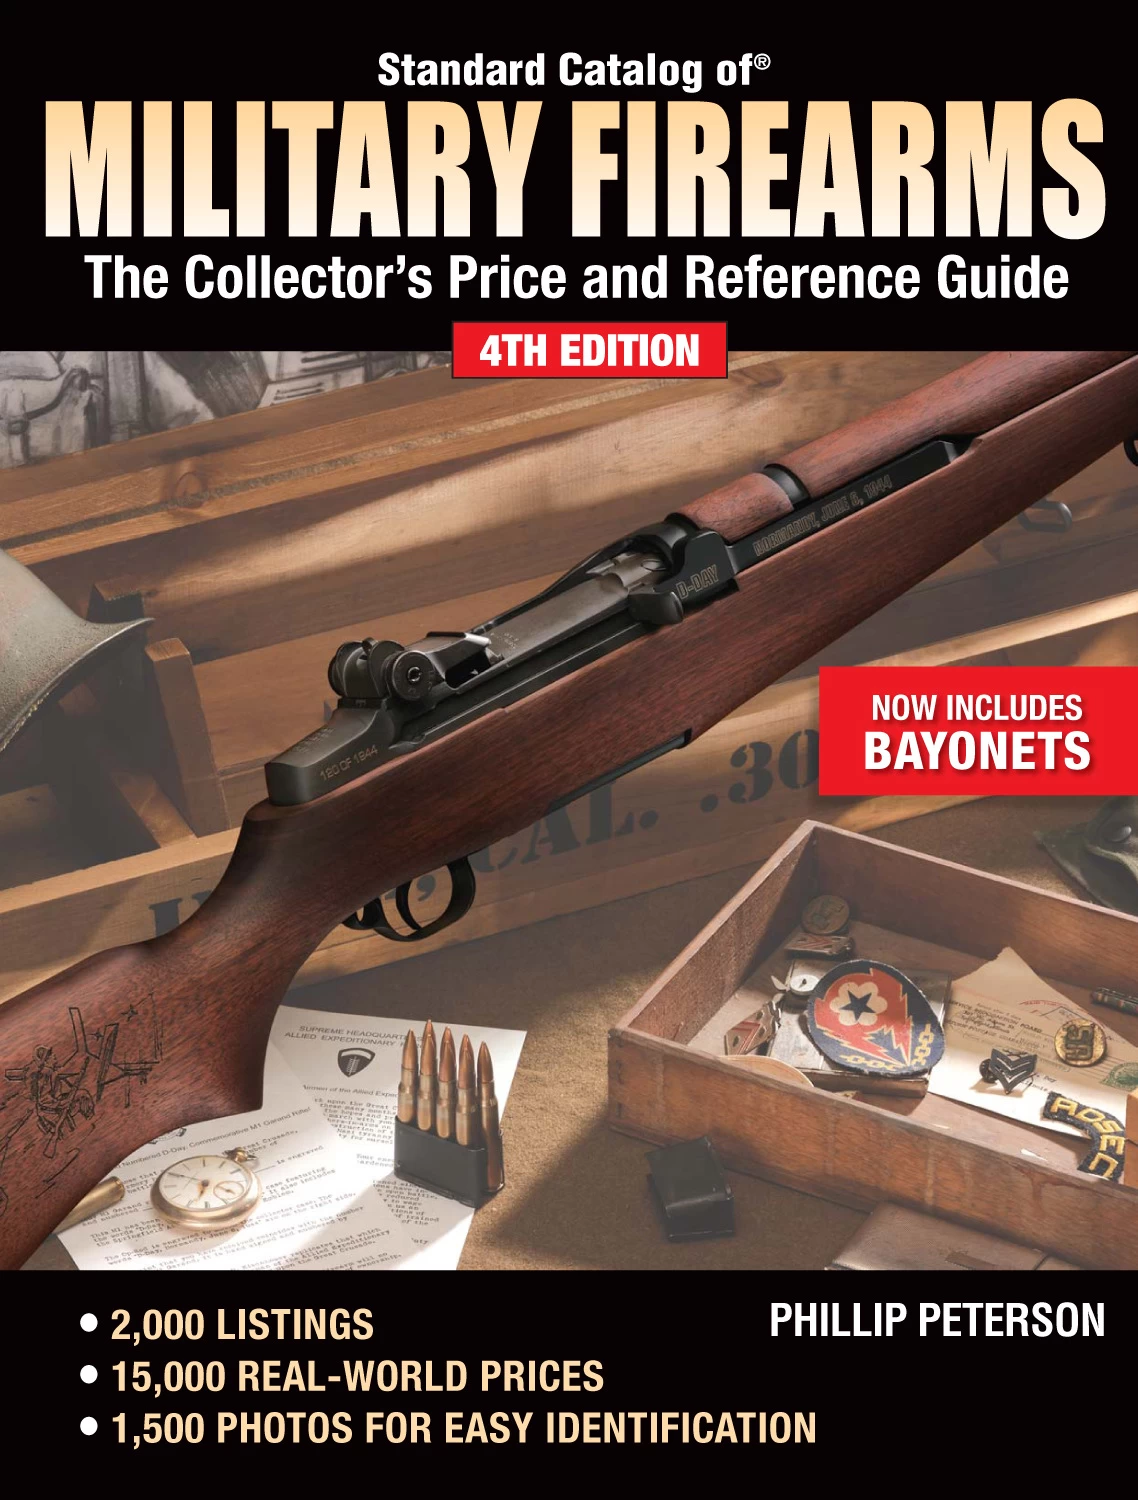 German Military Collectibles Price Guide. Janes firearms book.